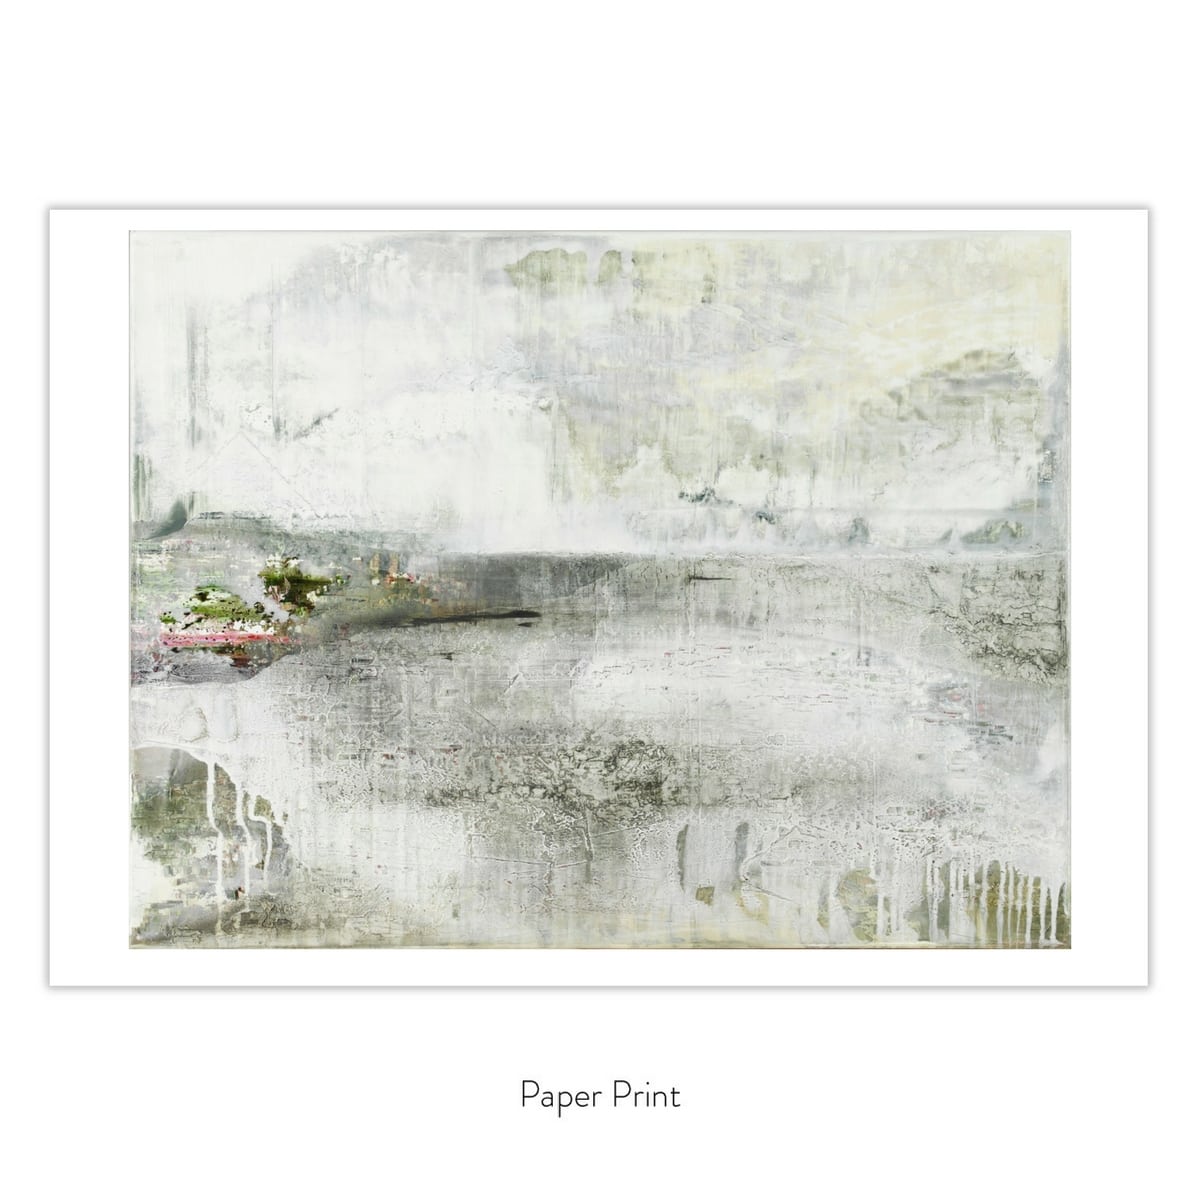 A Peaceful Place in paper print format